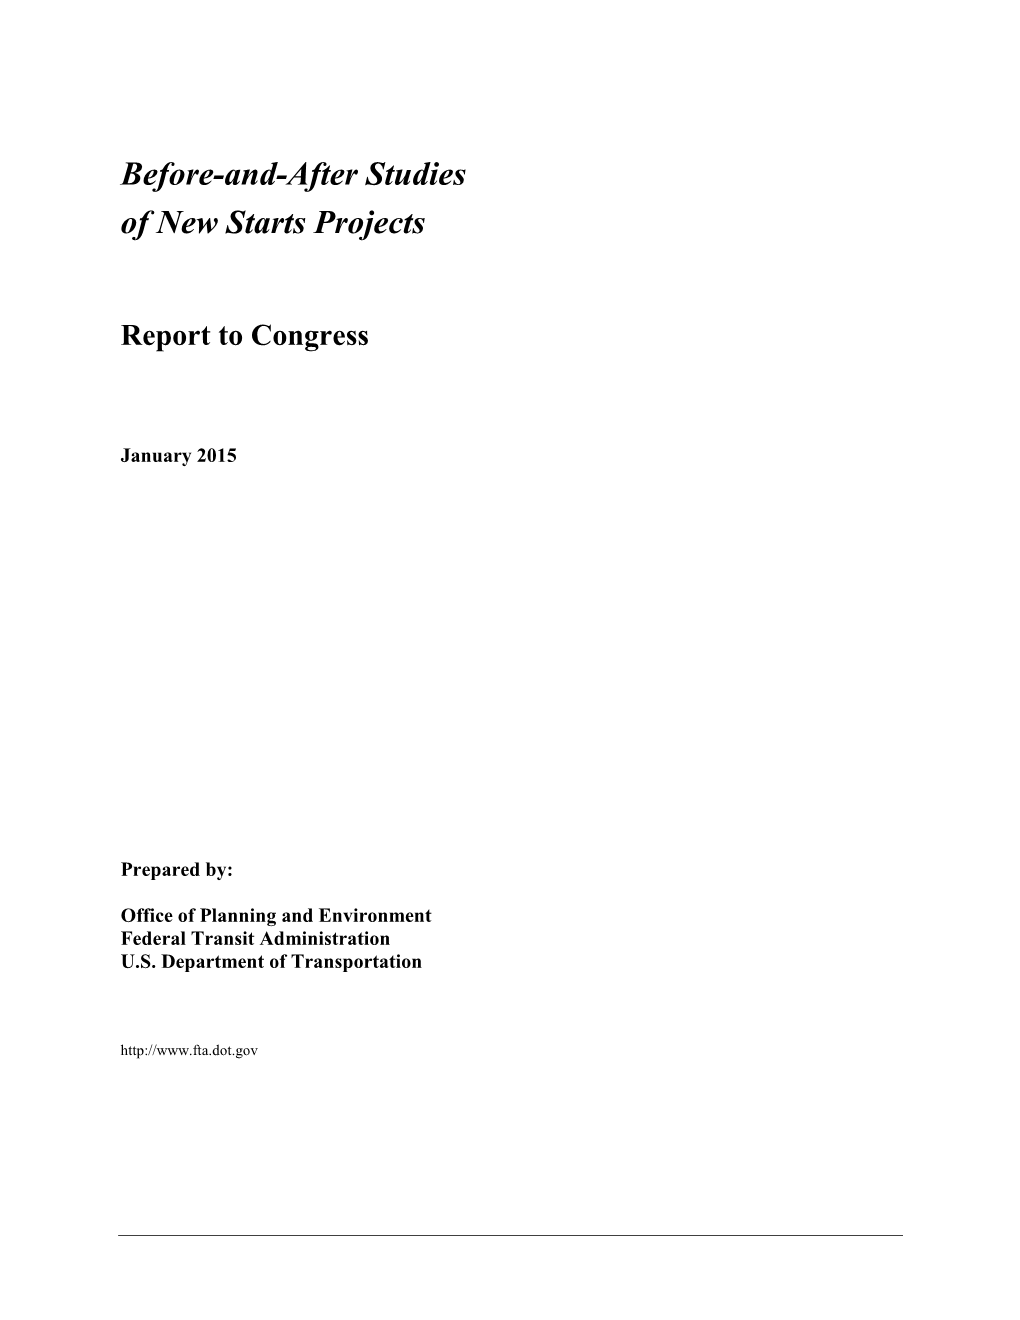 Before-And-After Studies: Report to Congress, January 2015